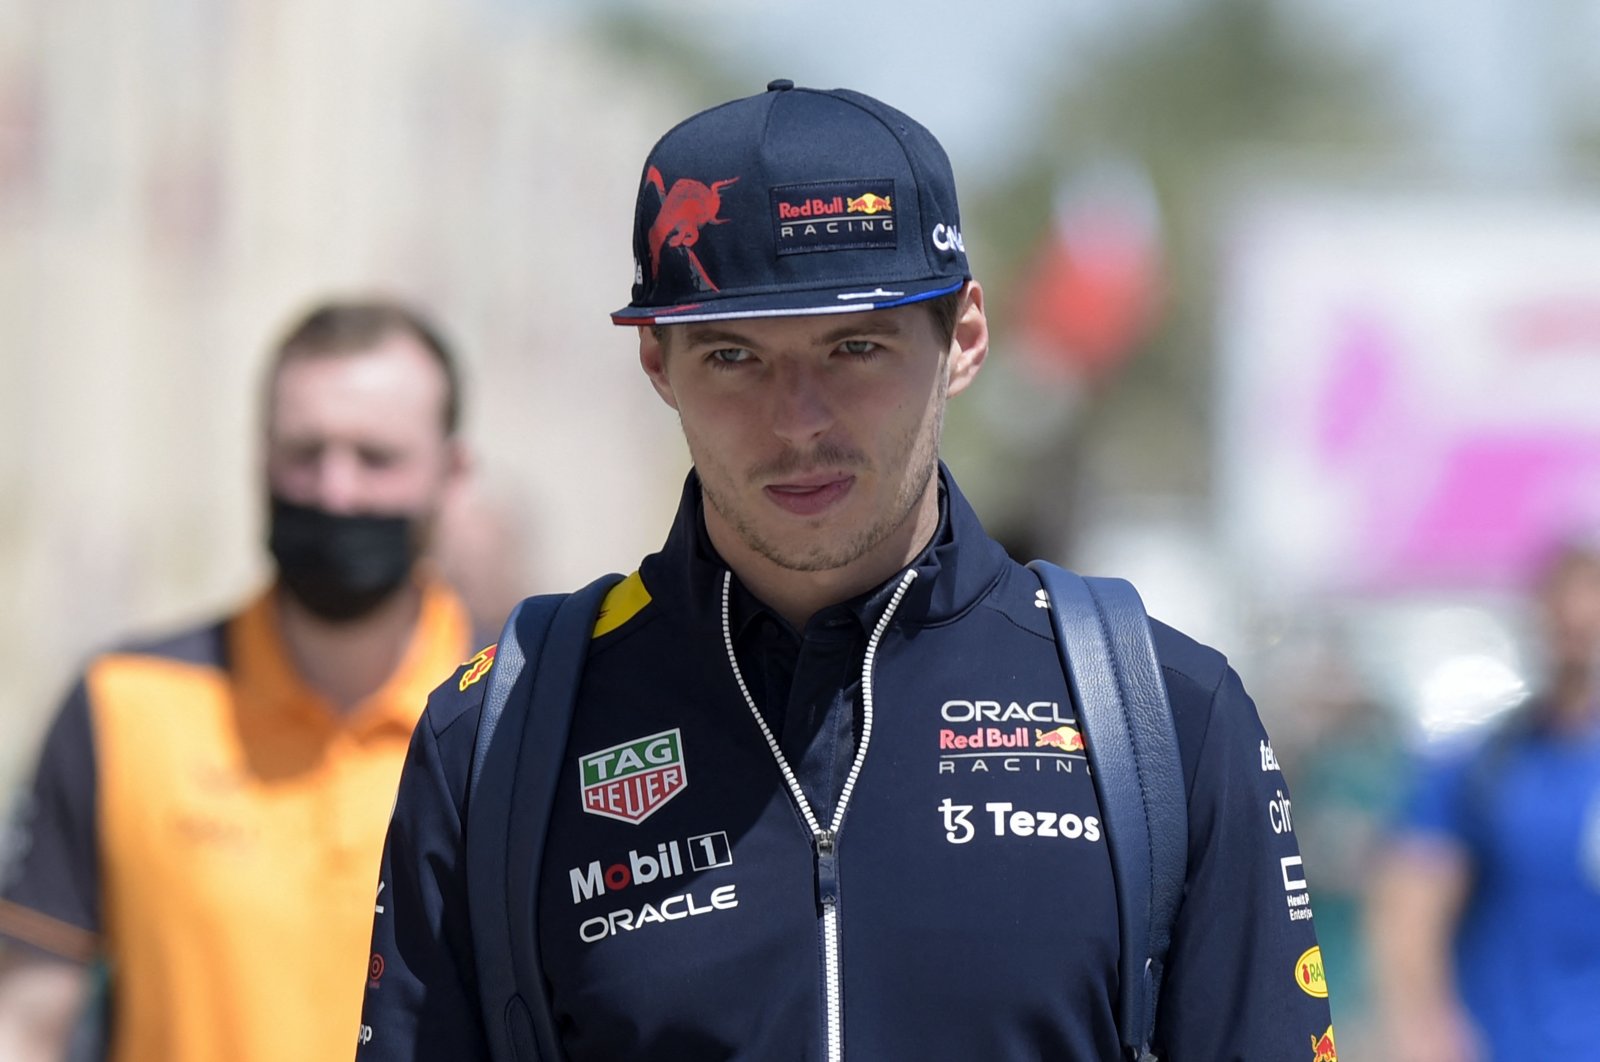 Max Verstappen arrives ahead of F1 Bahrain GP first practice session, Sakhir, Bahrain, March 18, 2022. (AFP Photo)